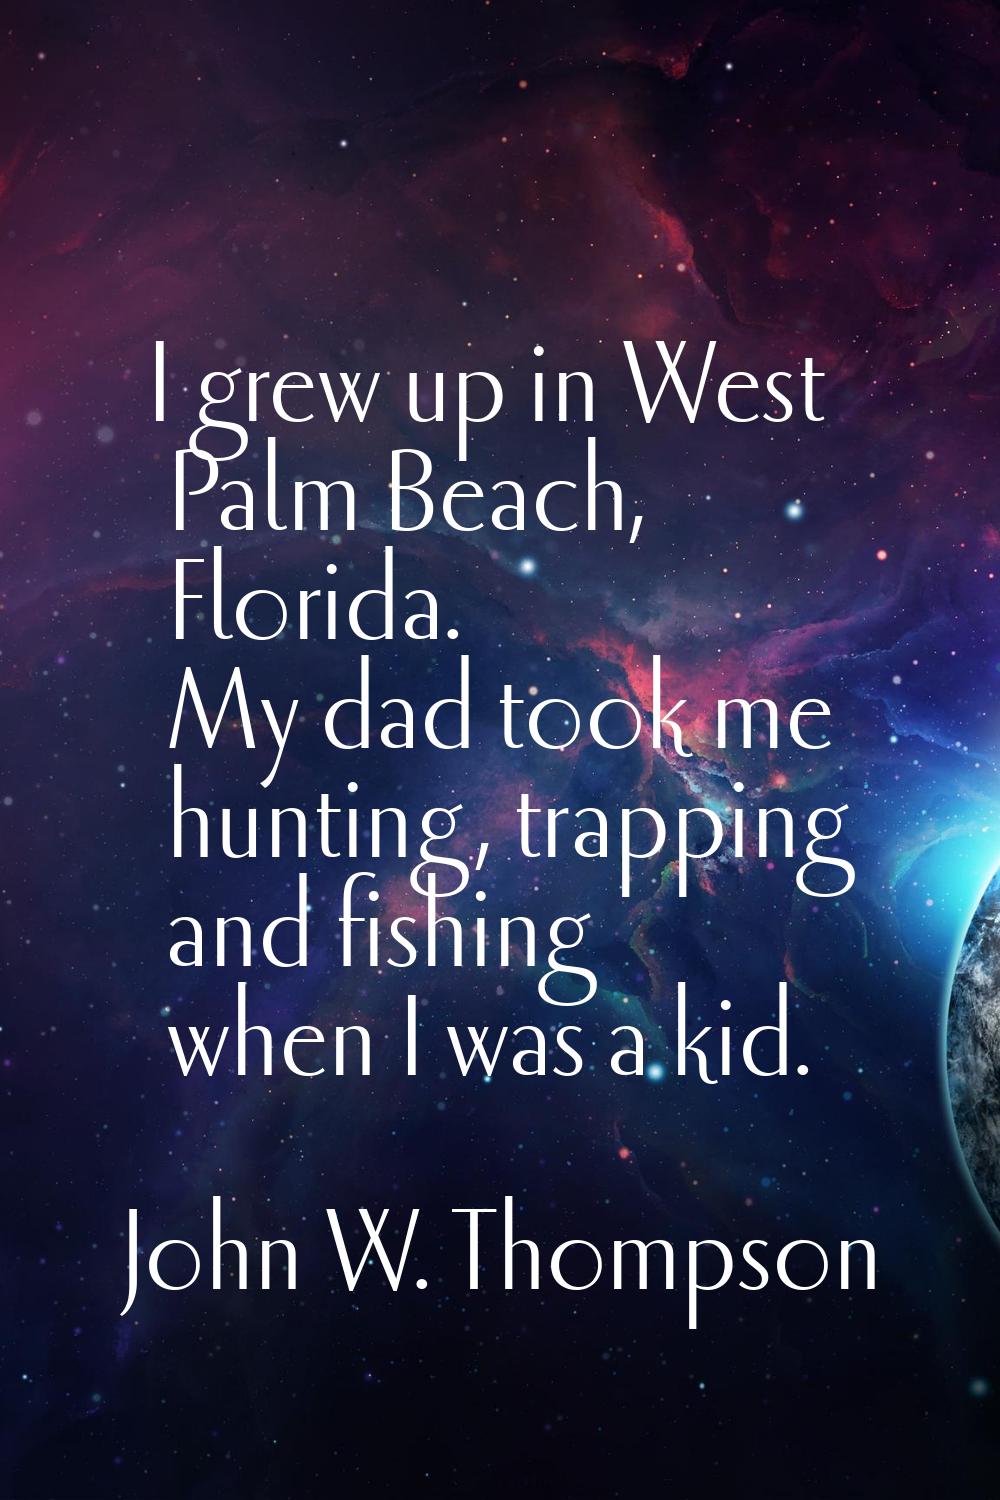 I grew up in West Palm Beach, Florida. My dad took me hunting, trapping and fishing when I was a ki